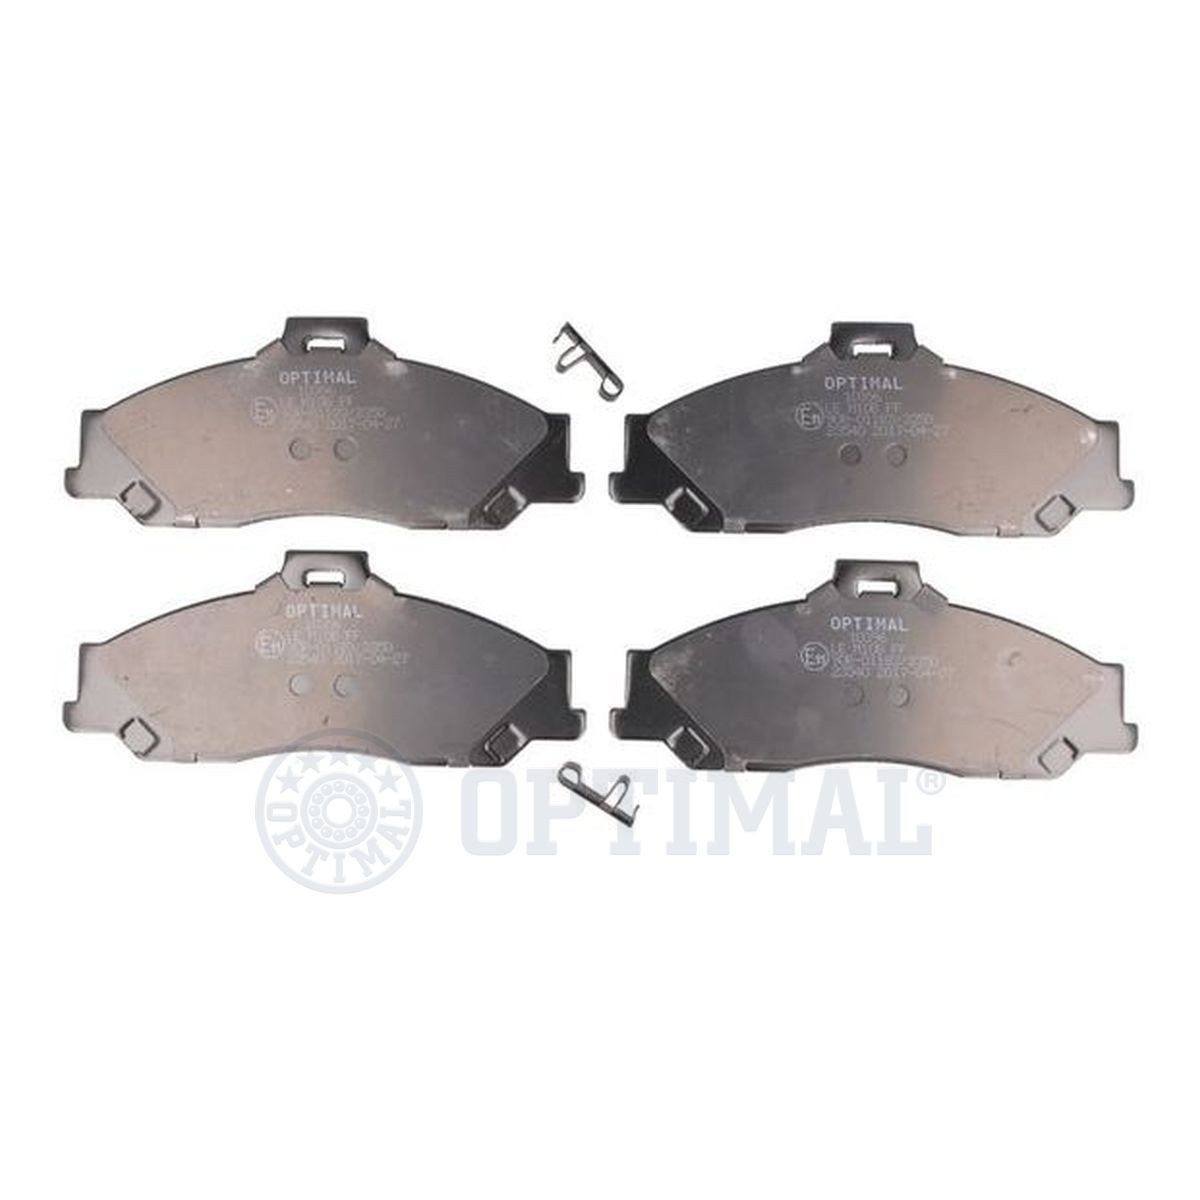 OPTIMAL 10396 Brake pad set Front Axle, with acoustic wear warning